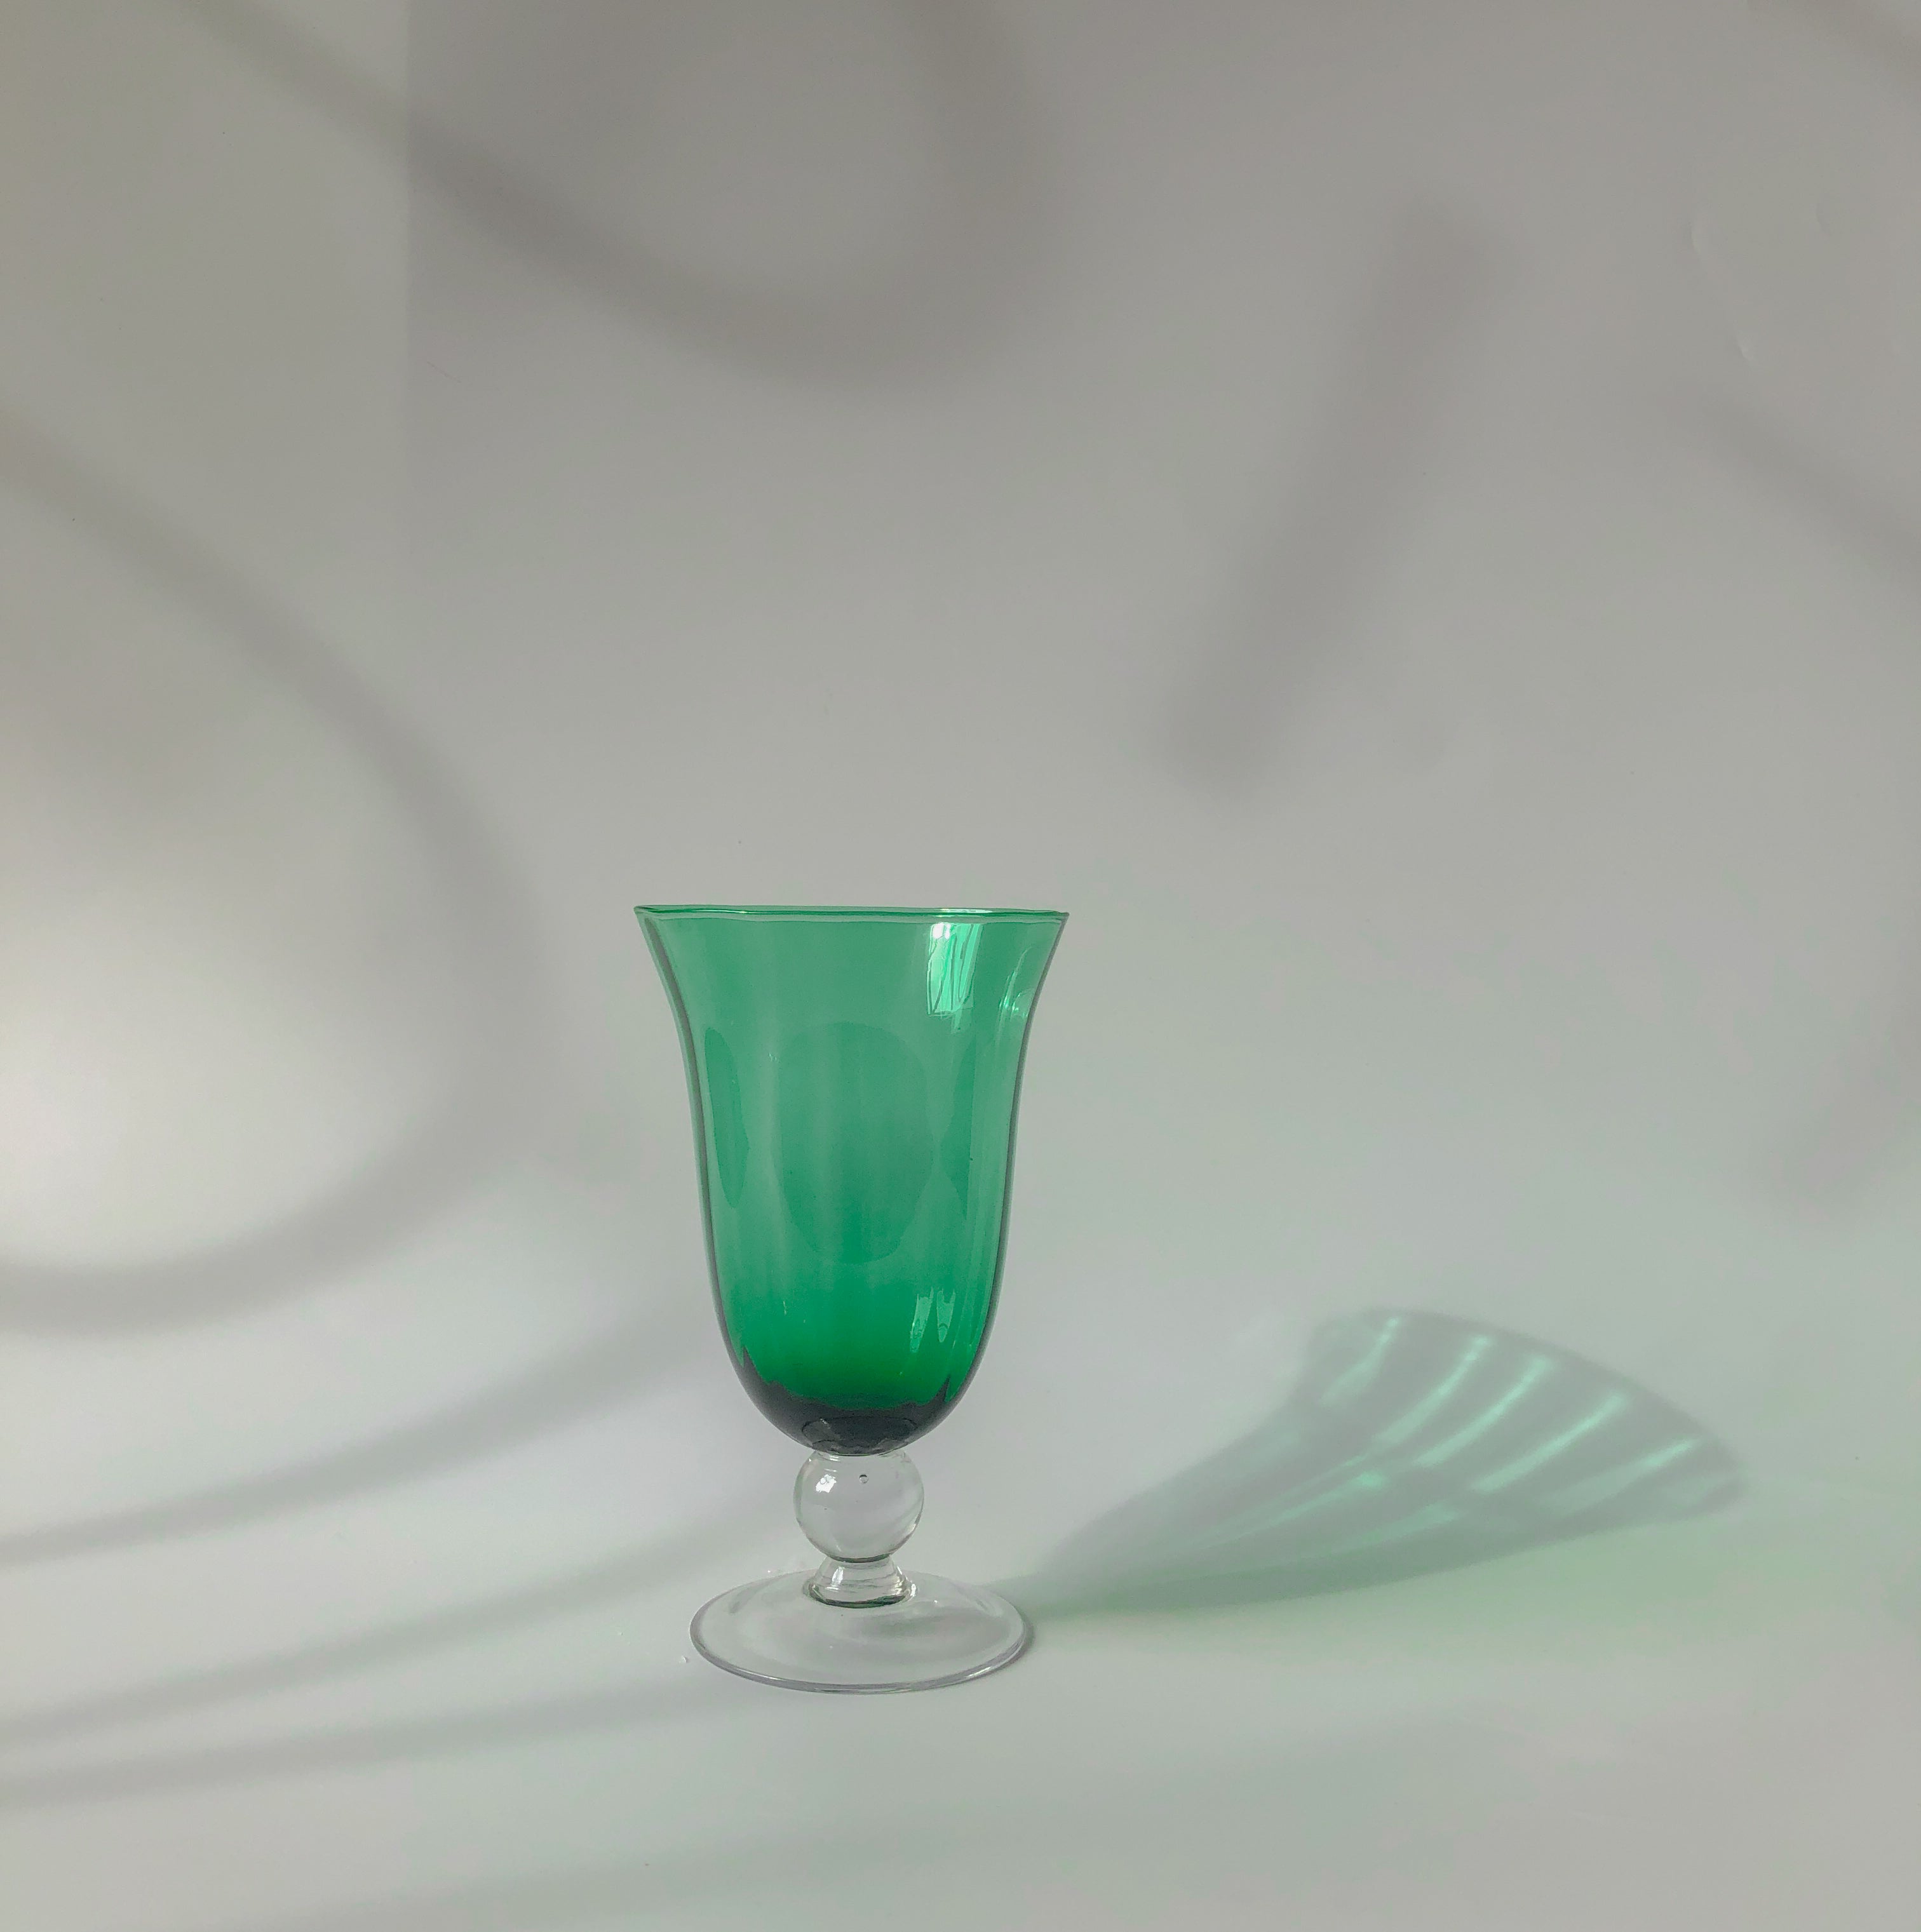 Emerald Goblet by PROSE Tabletop